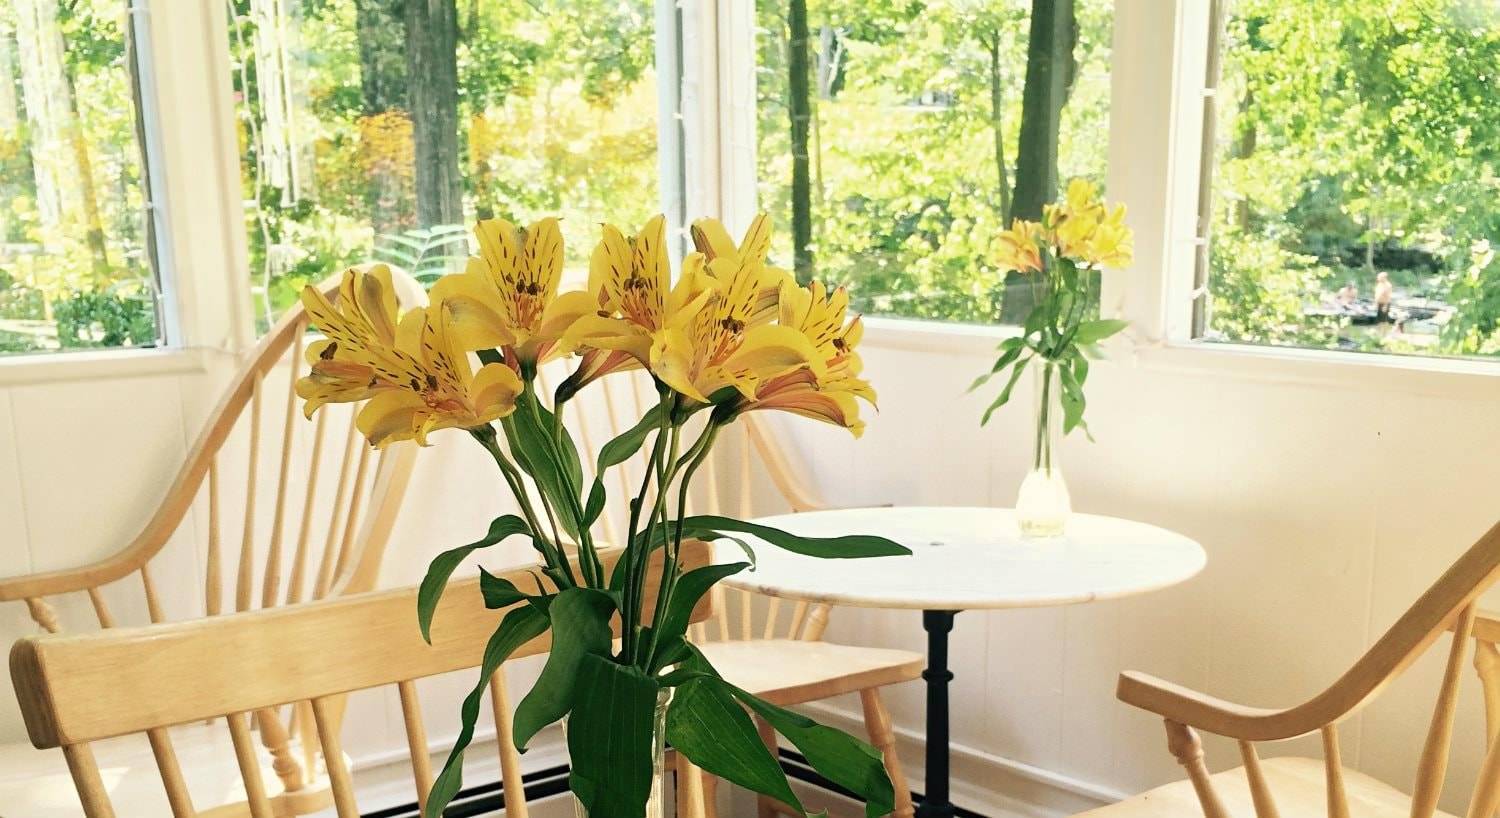 Small wood dining tables topped with vases of yellow lilies surrounded by windows with view of lush greenery